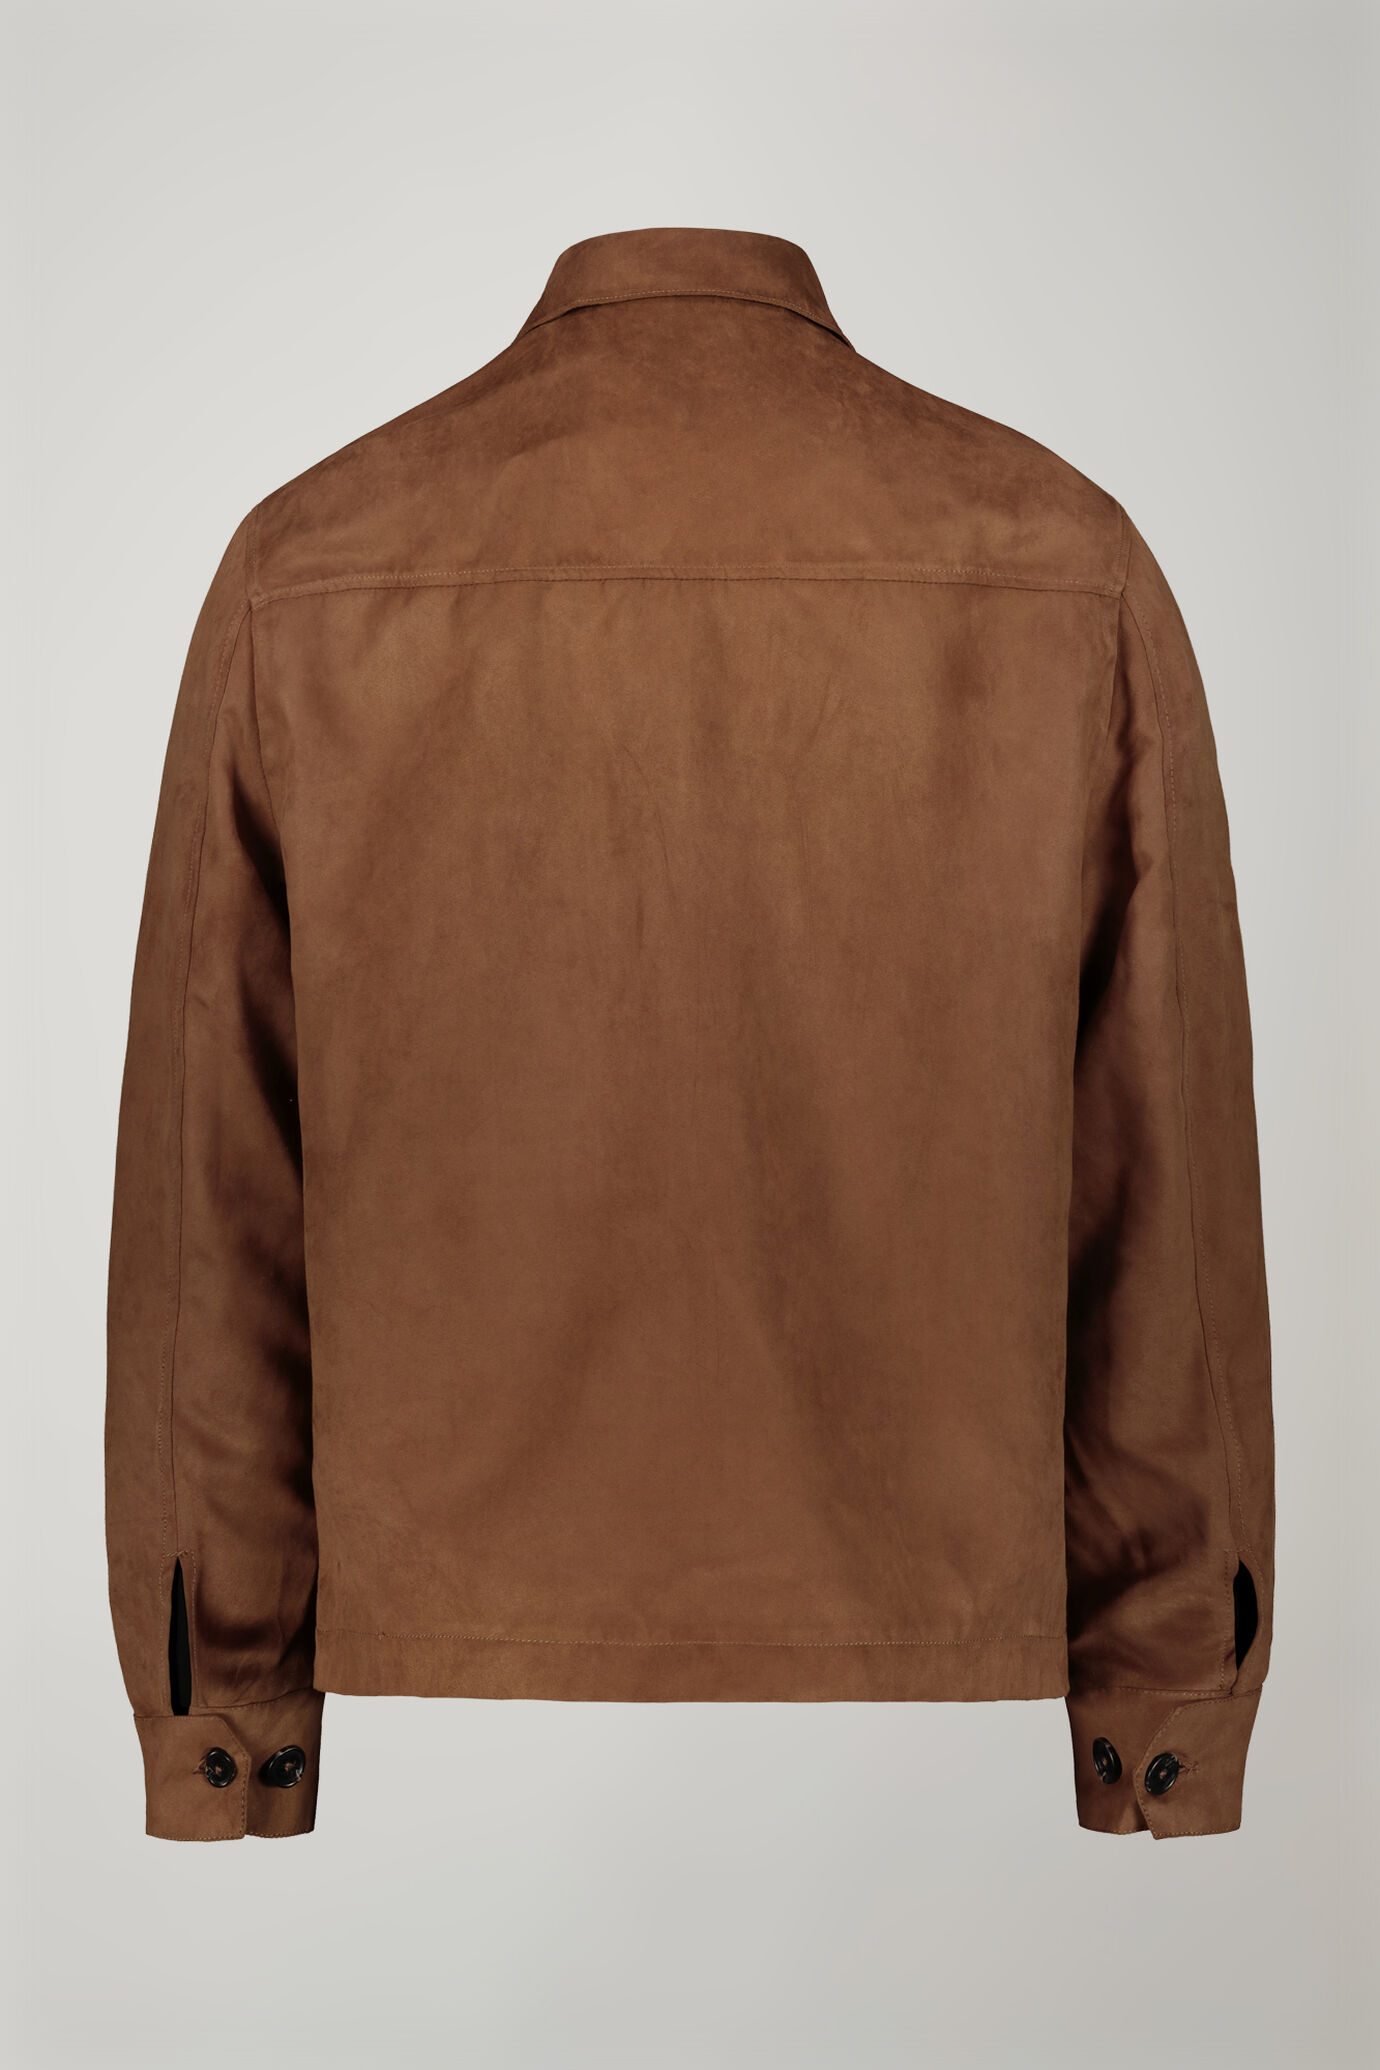 Men's jacket with suede-like fabric regular fit image number 6